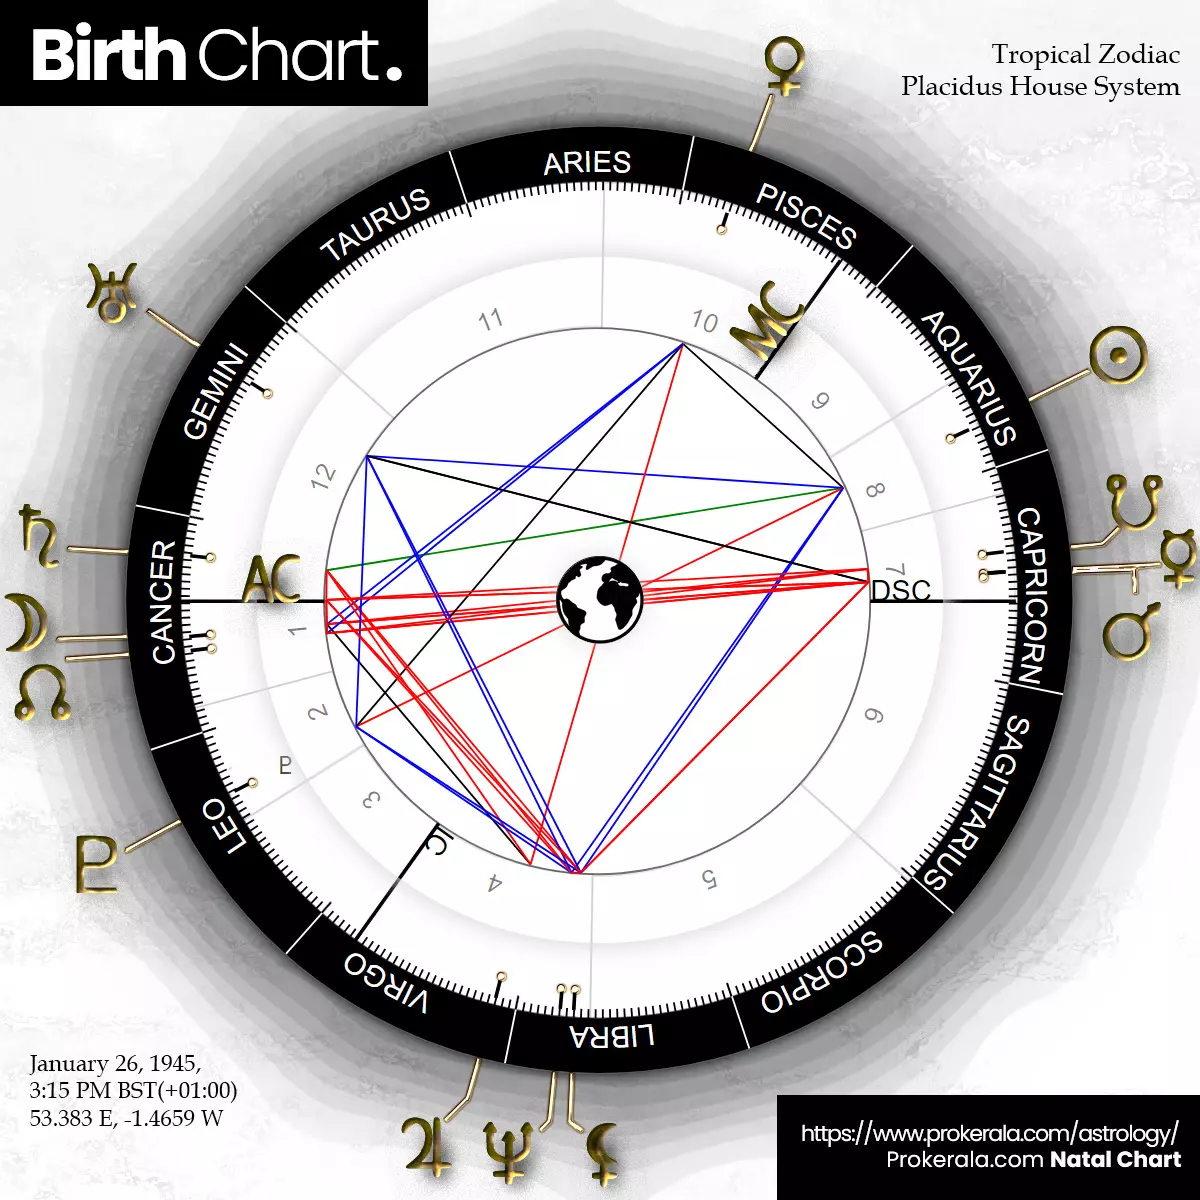 Explaining the key components of an astrology birth chart